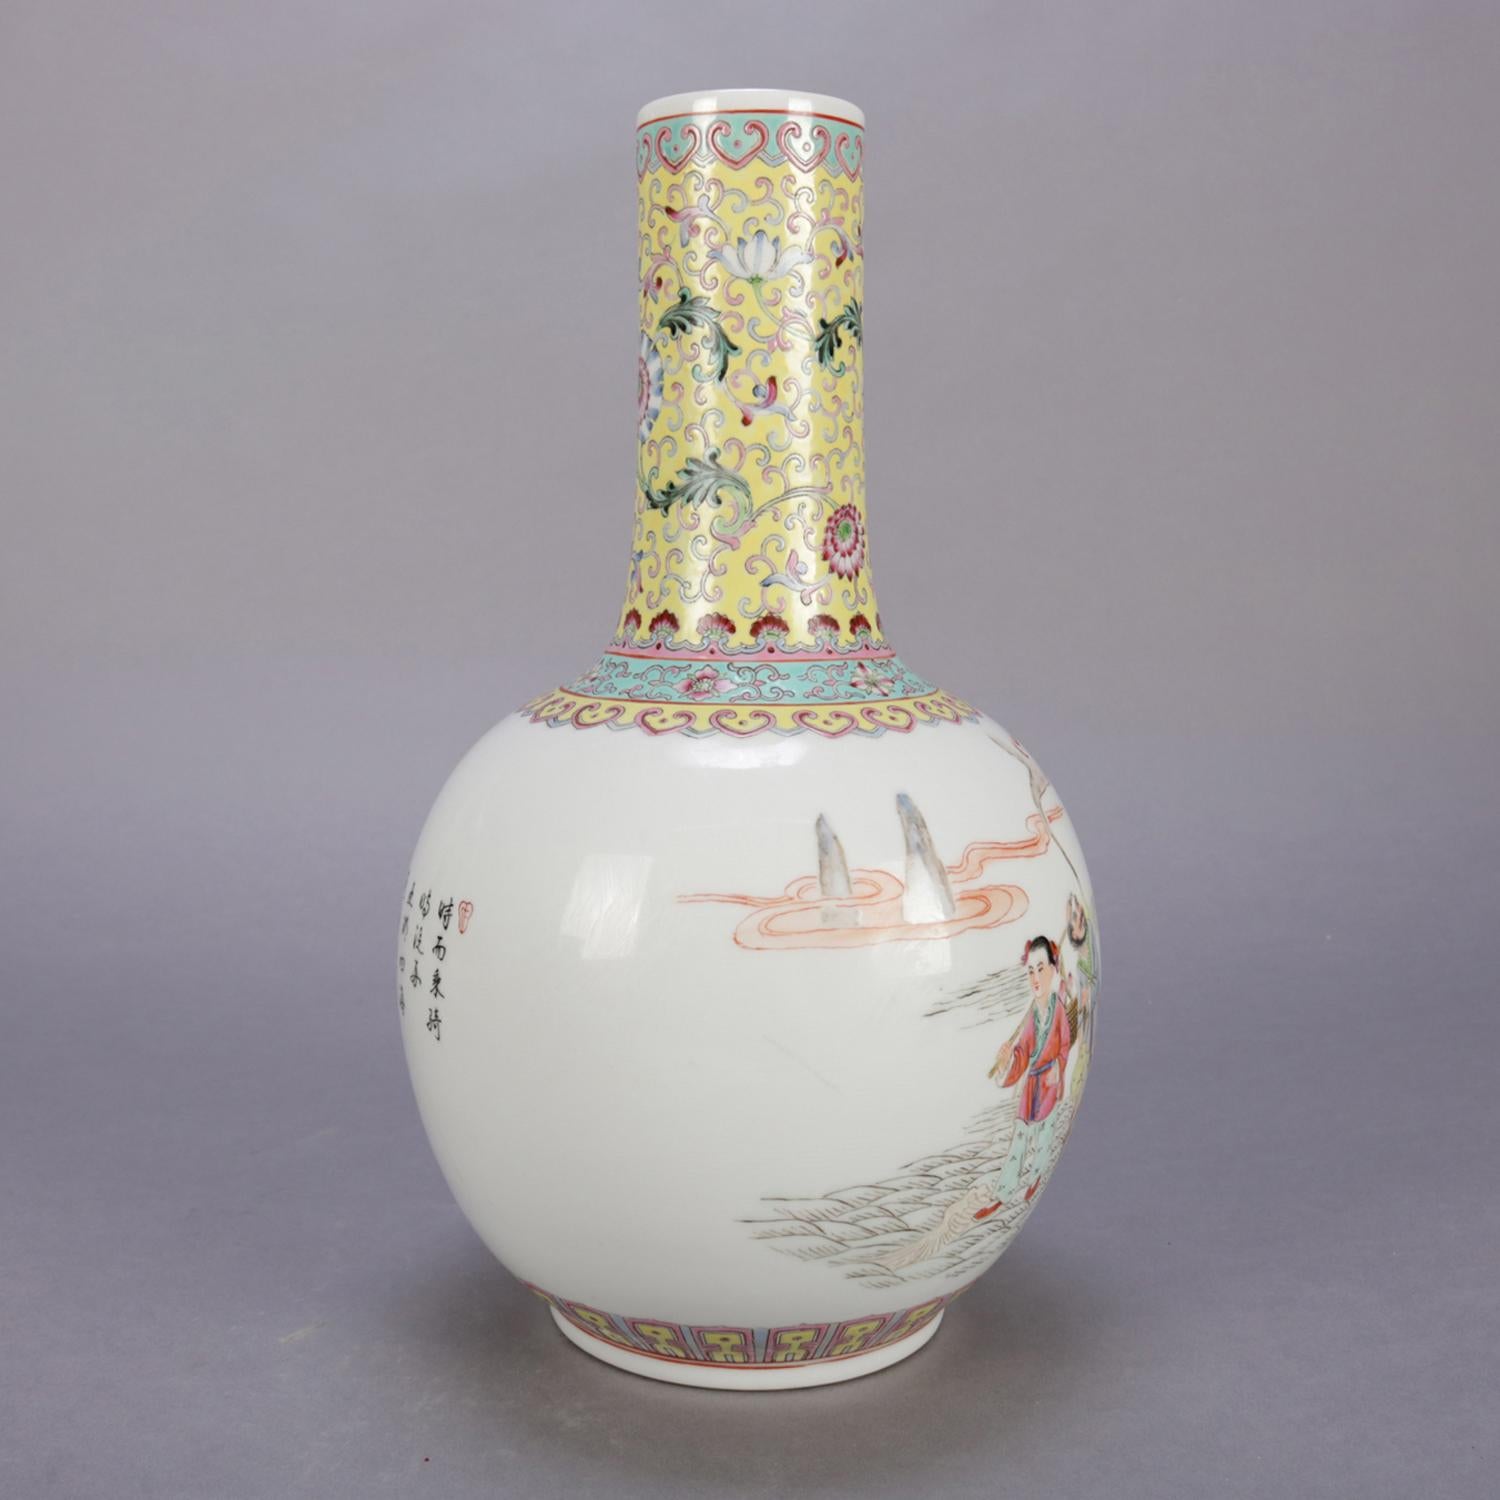 Chinese Enameled Porcelain Pictorial Vase, Chop Mark Signed and Verbiage 1